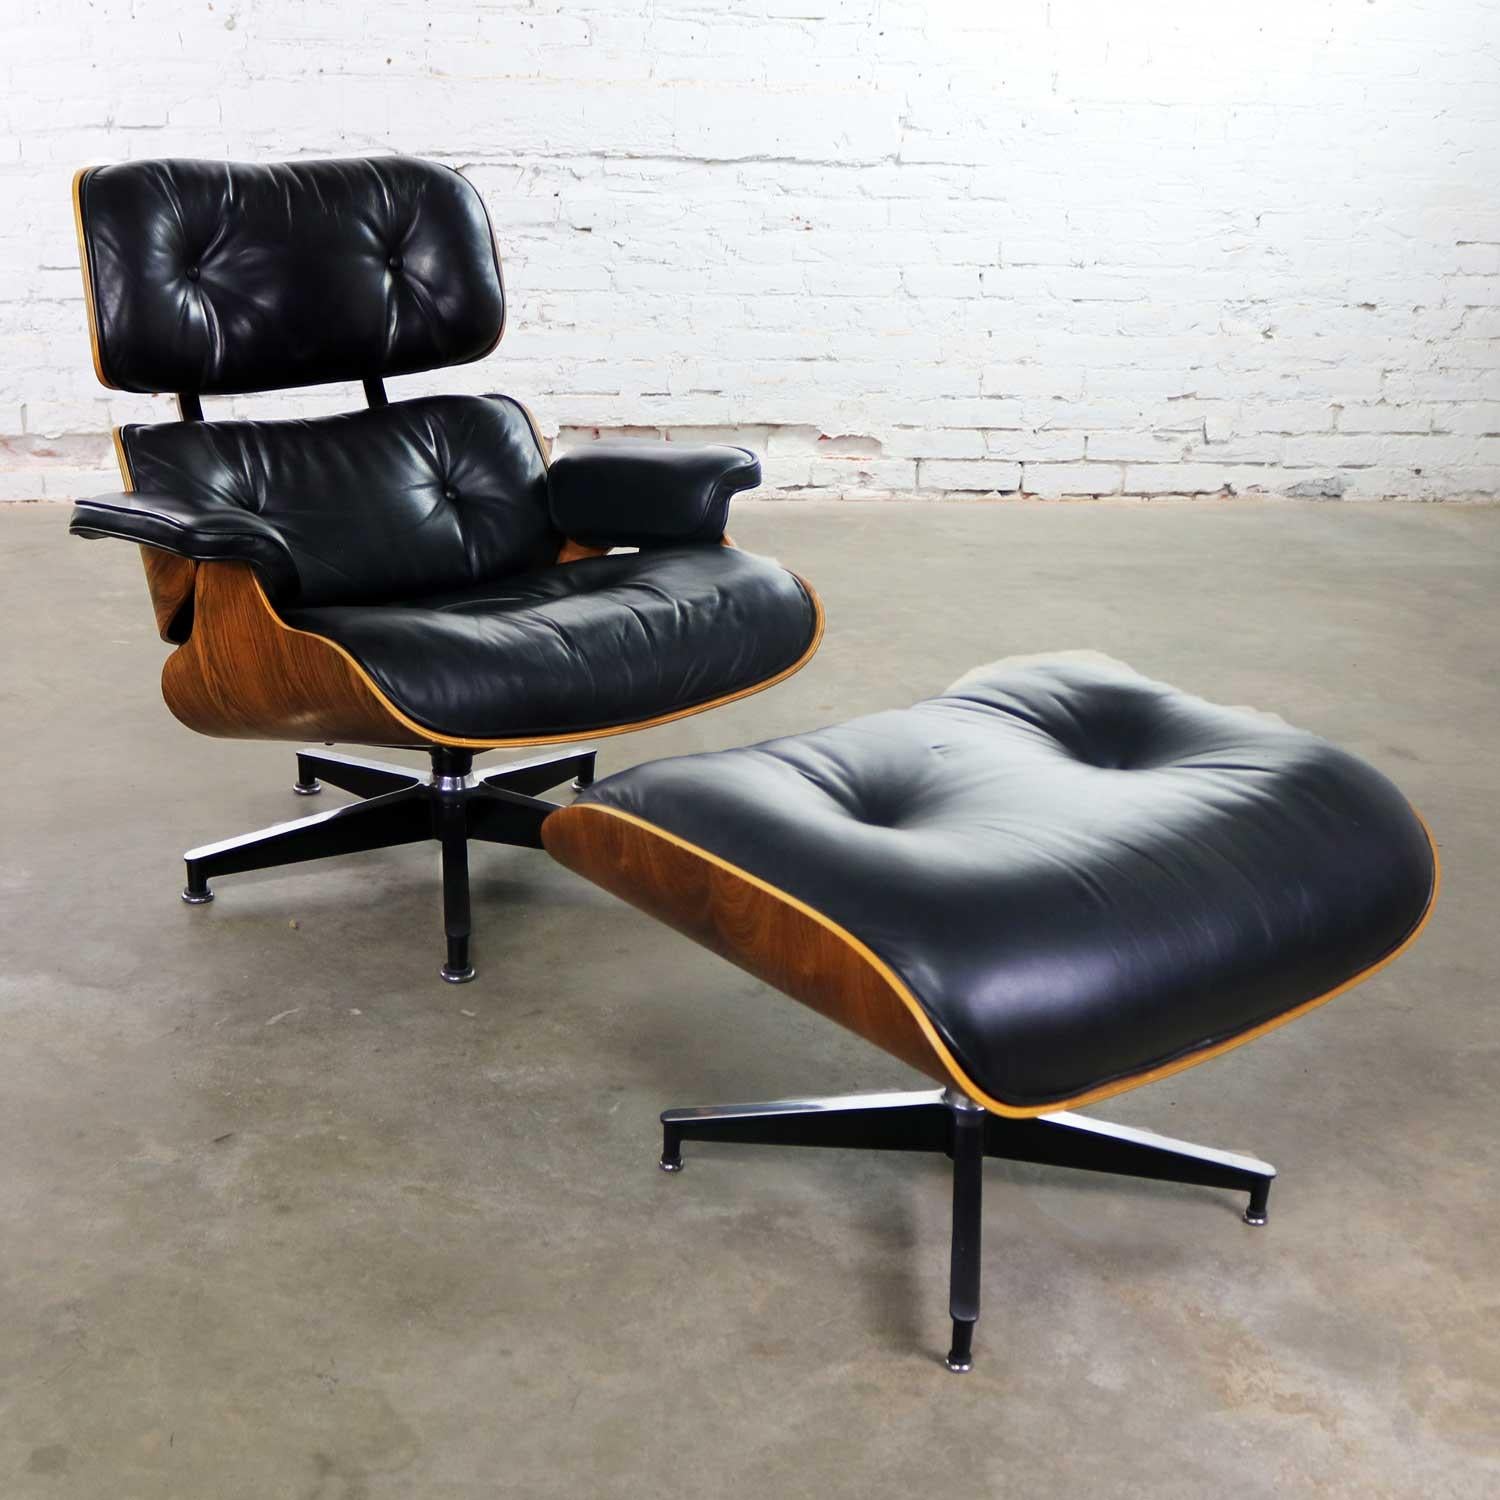 Handsome vintage Charles and Ray Eames designed black leather and rosewood 670 lounge chair and 671 ottoman for Herman Miller. They are both in wonderful vintage condition with no outstanding flaws. The leather on the ottoman does have a small